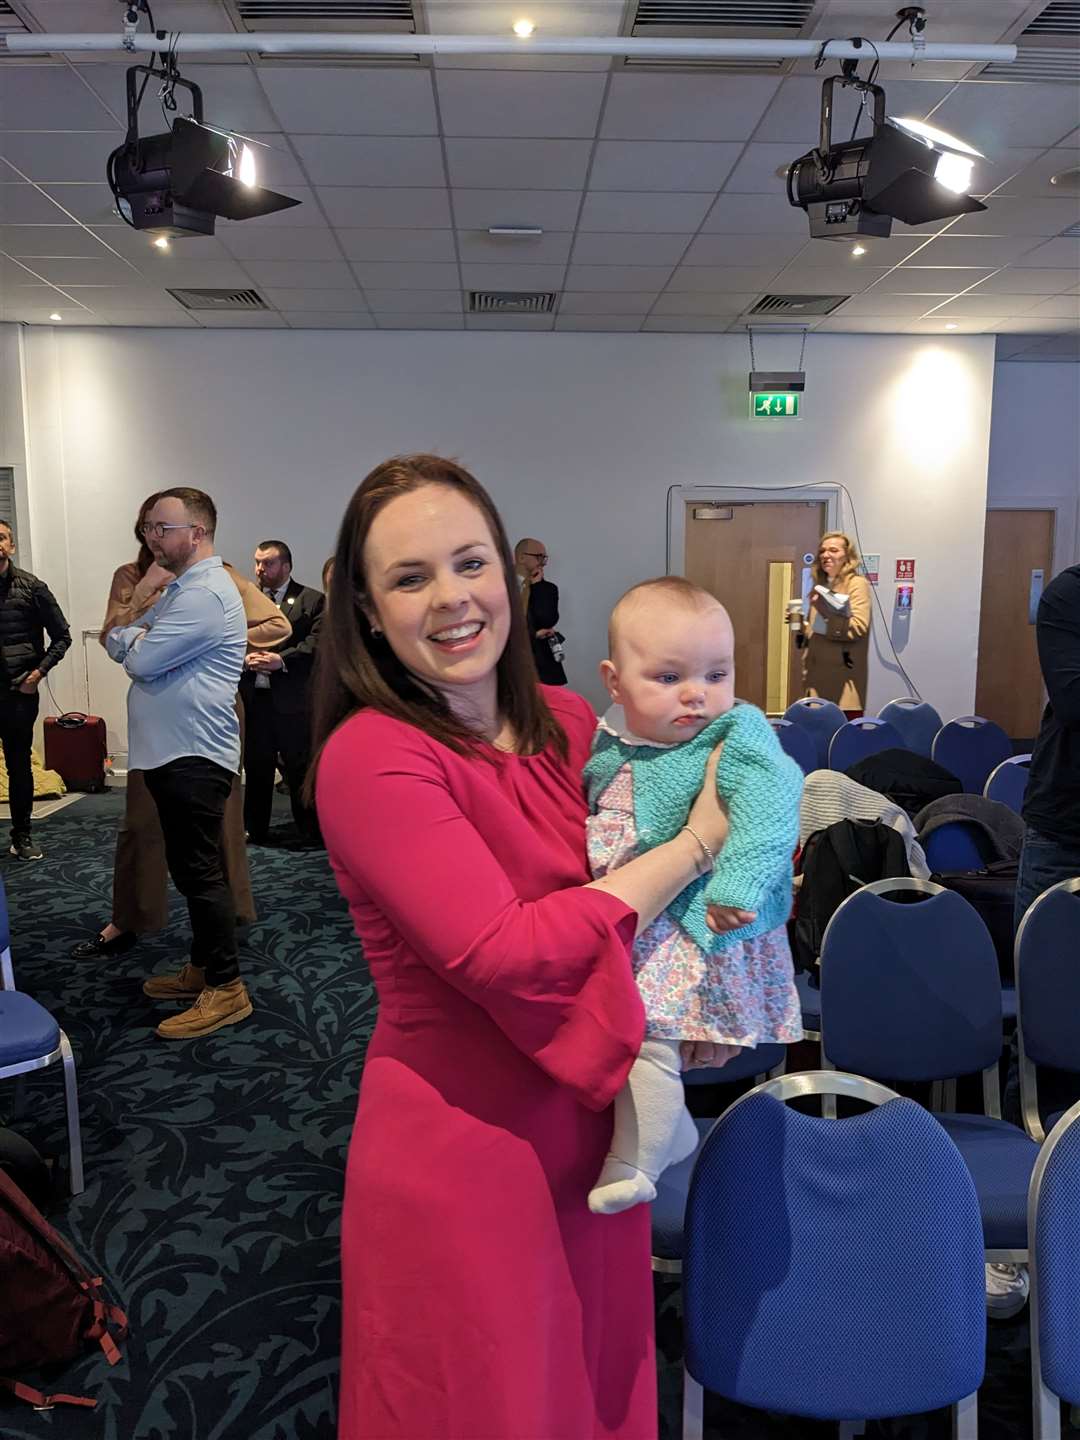 Kate Forbes at the SNP leadership announcement, along with her daughter Naomi.